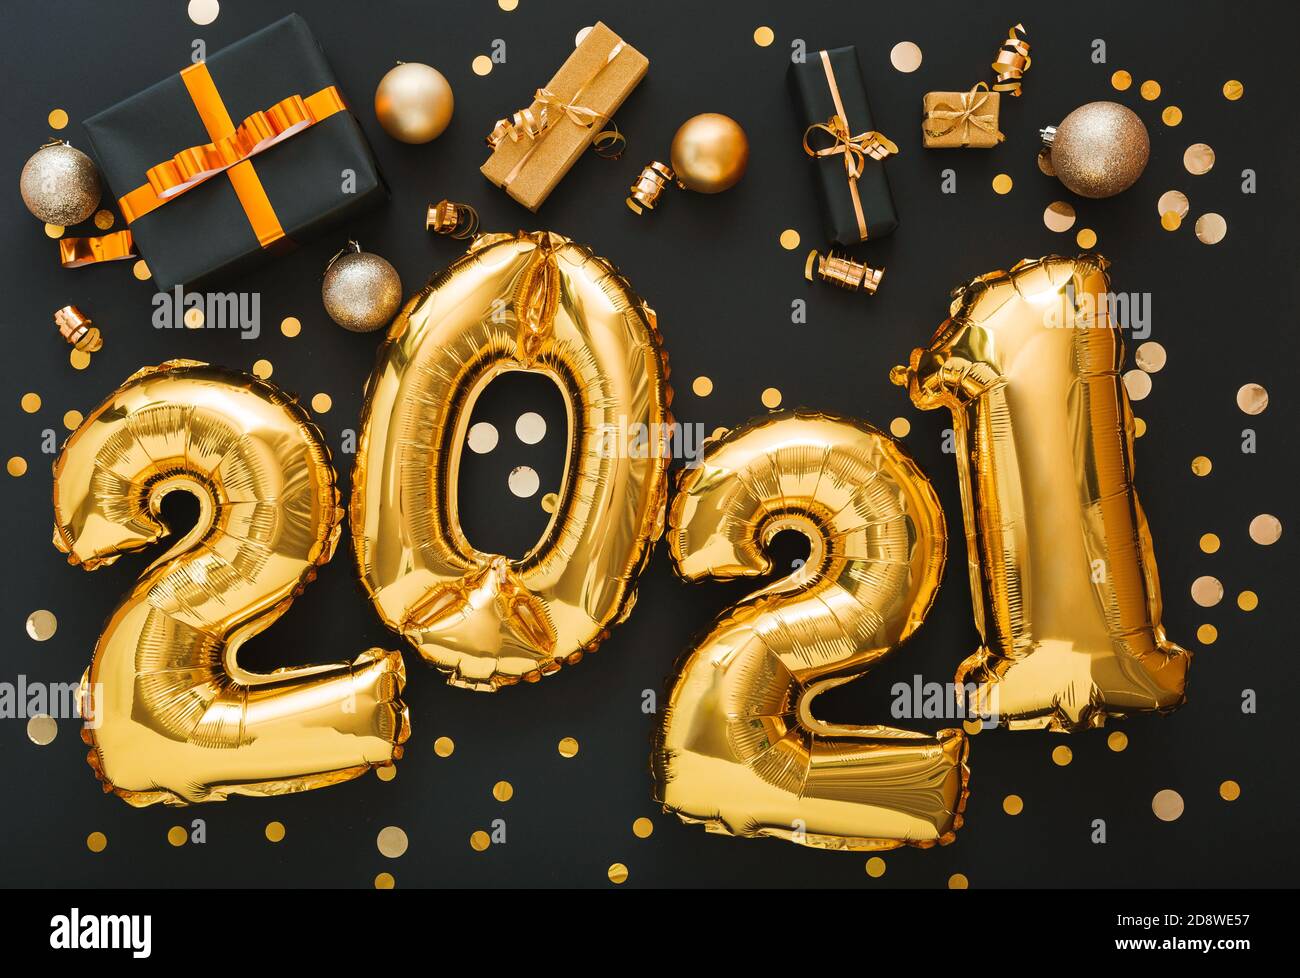 2021 balloon gold text on black background with golden confetti, Christmas gift boxes, gold balls, festive decor. Happy New year eve invitation with Stock Photo